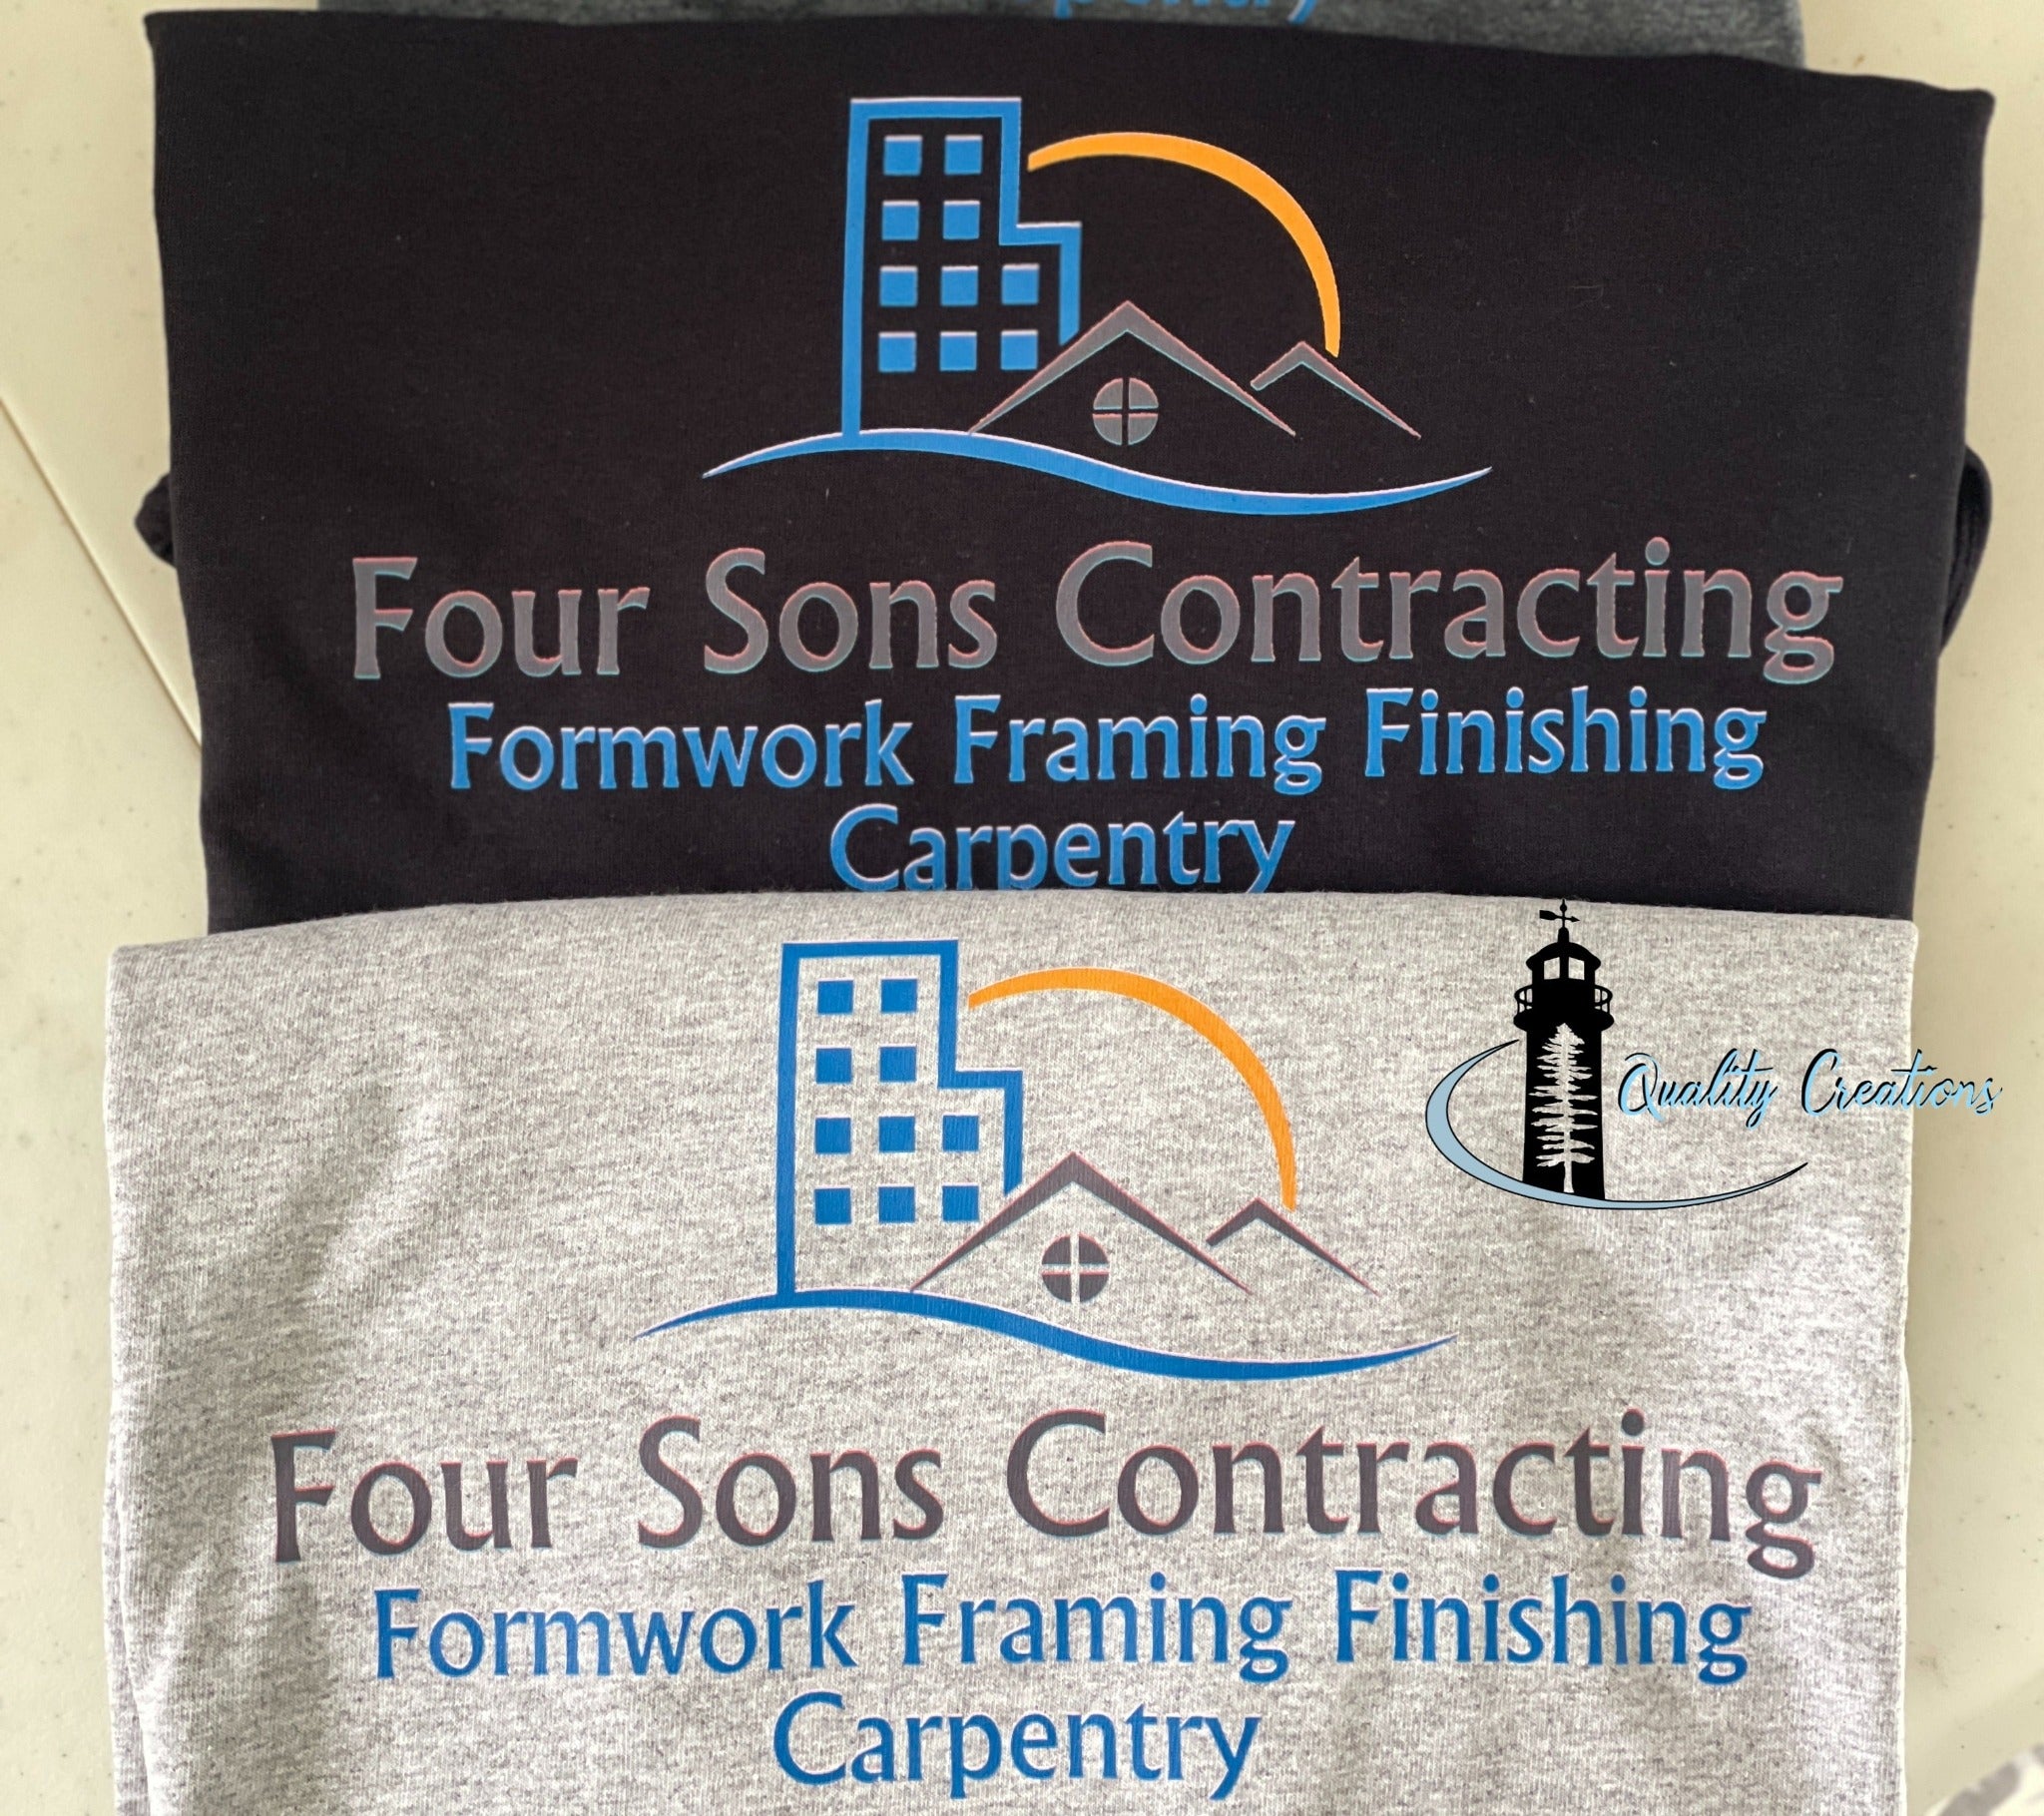 four sons contracting shirt quality creations moncton salsibury NB newbrunswick Canada